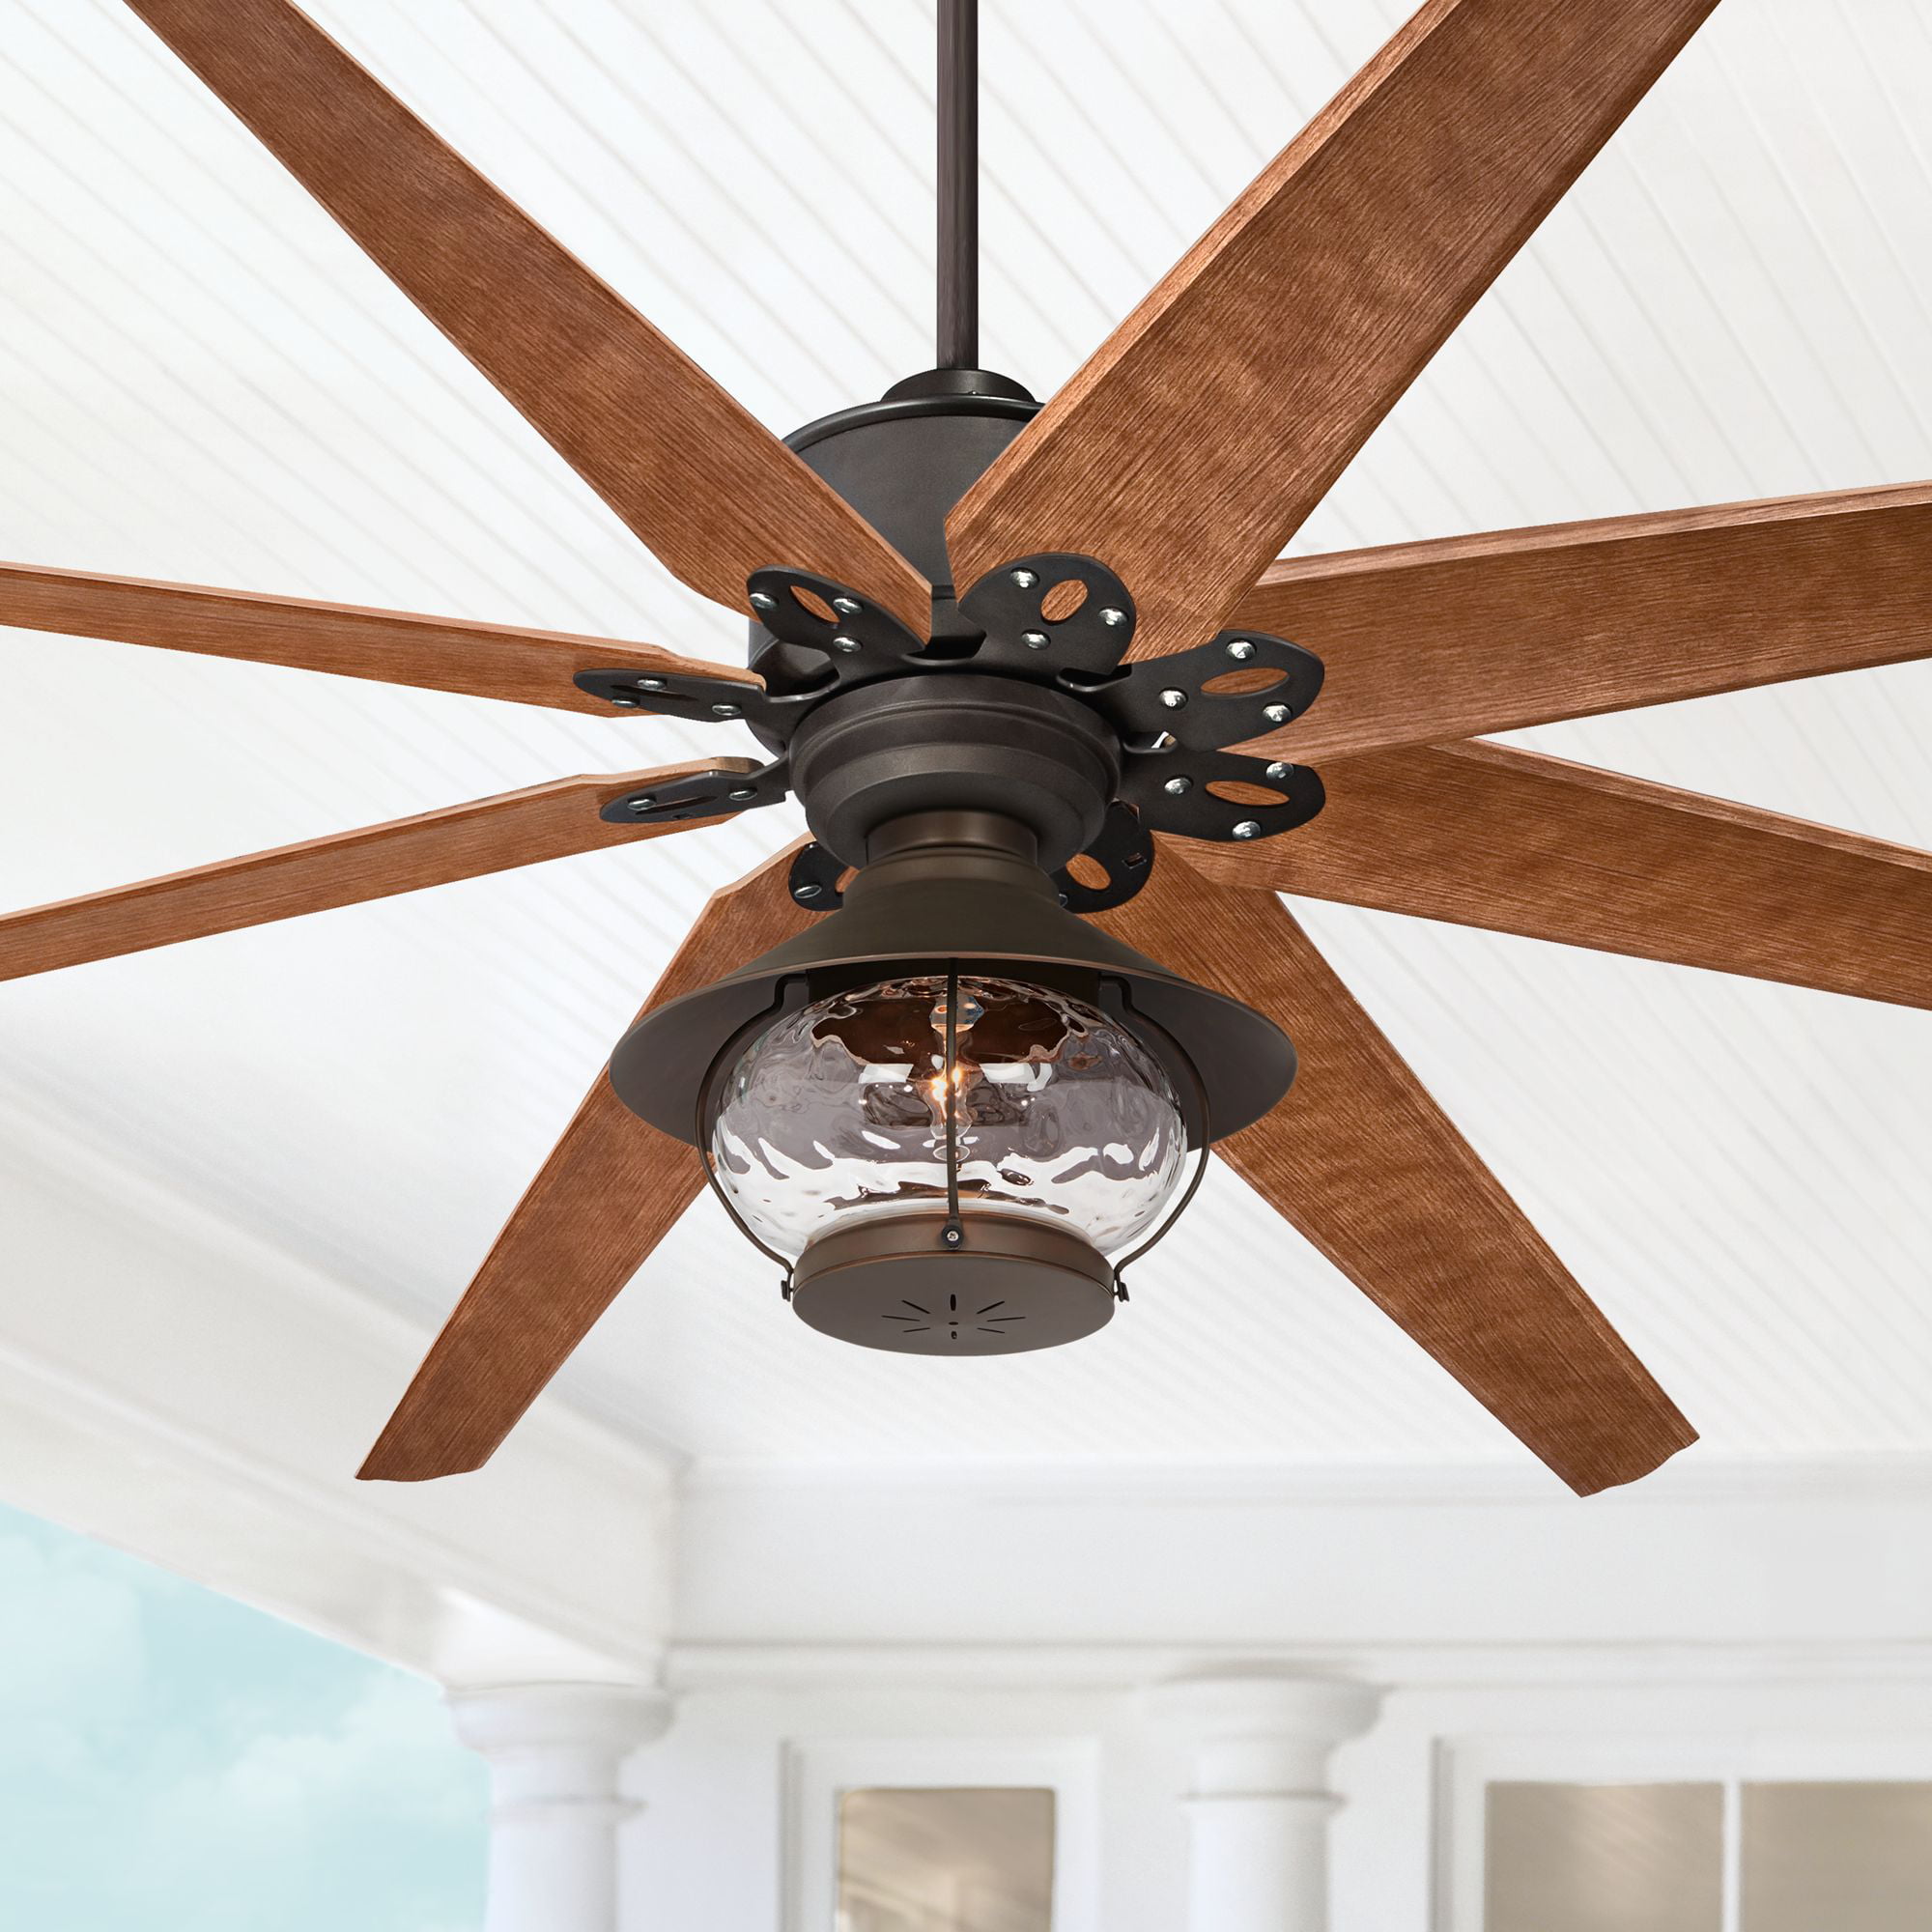 72" Modern Outdoor Ceiling Fan Oil Rubbed Bronze Damp Rated for Patio Porch 